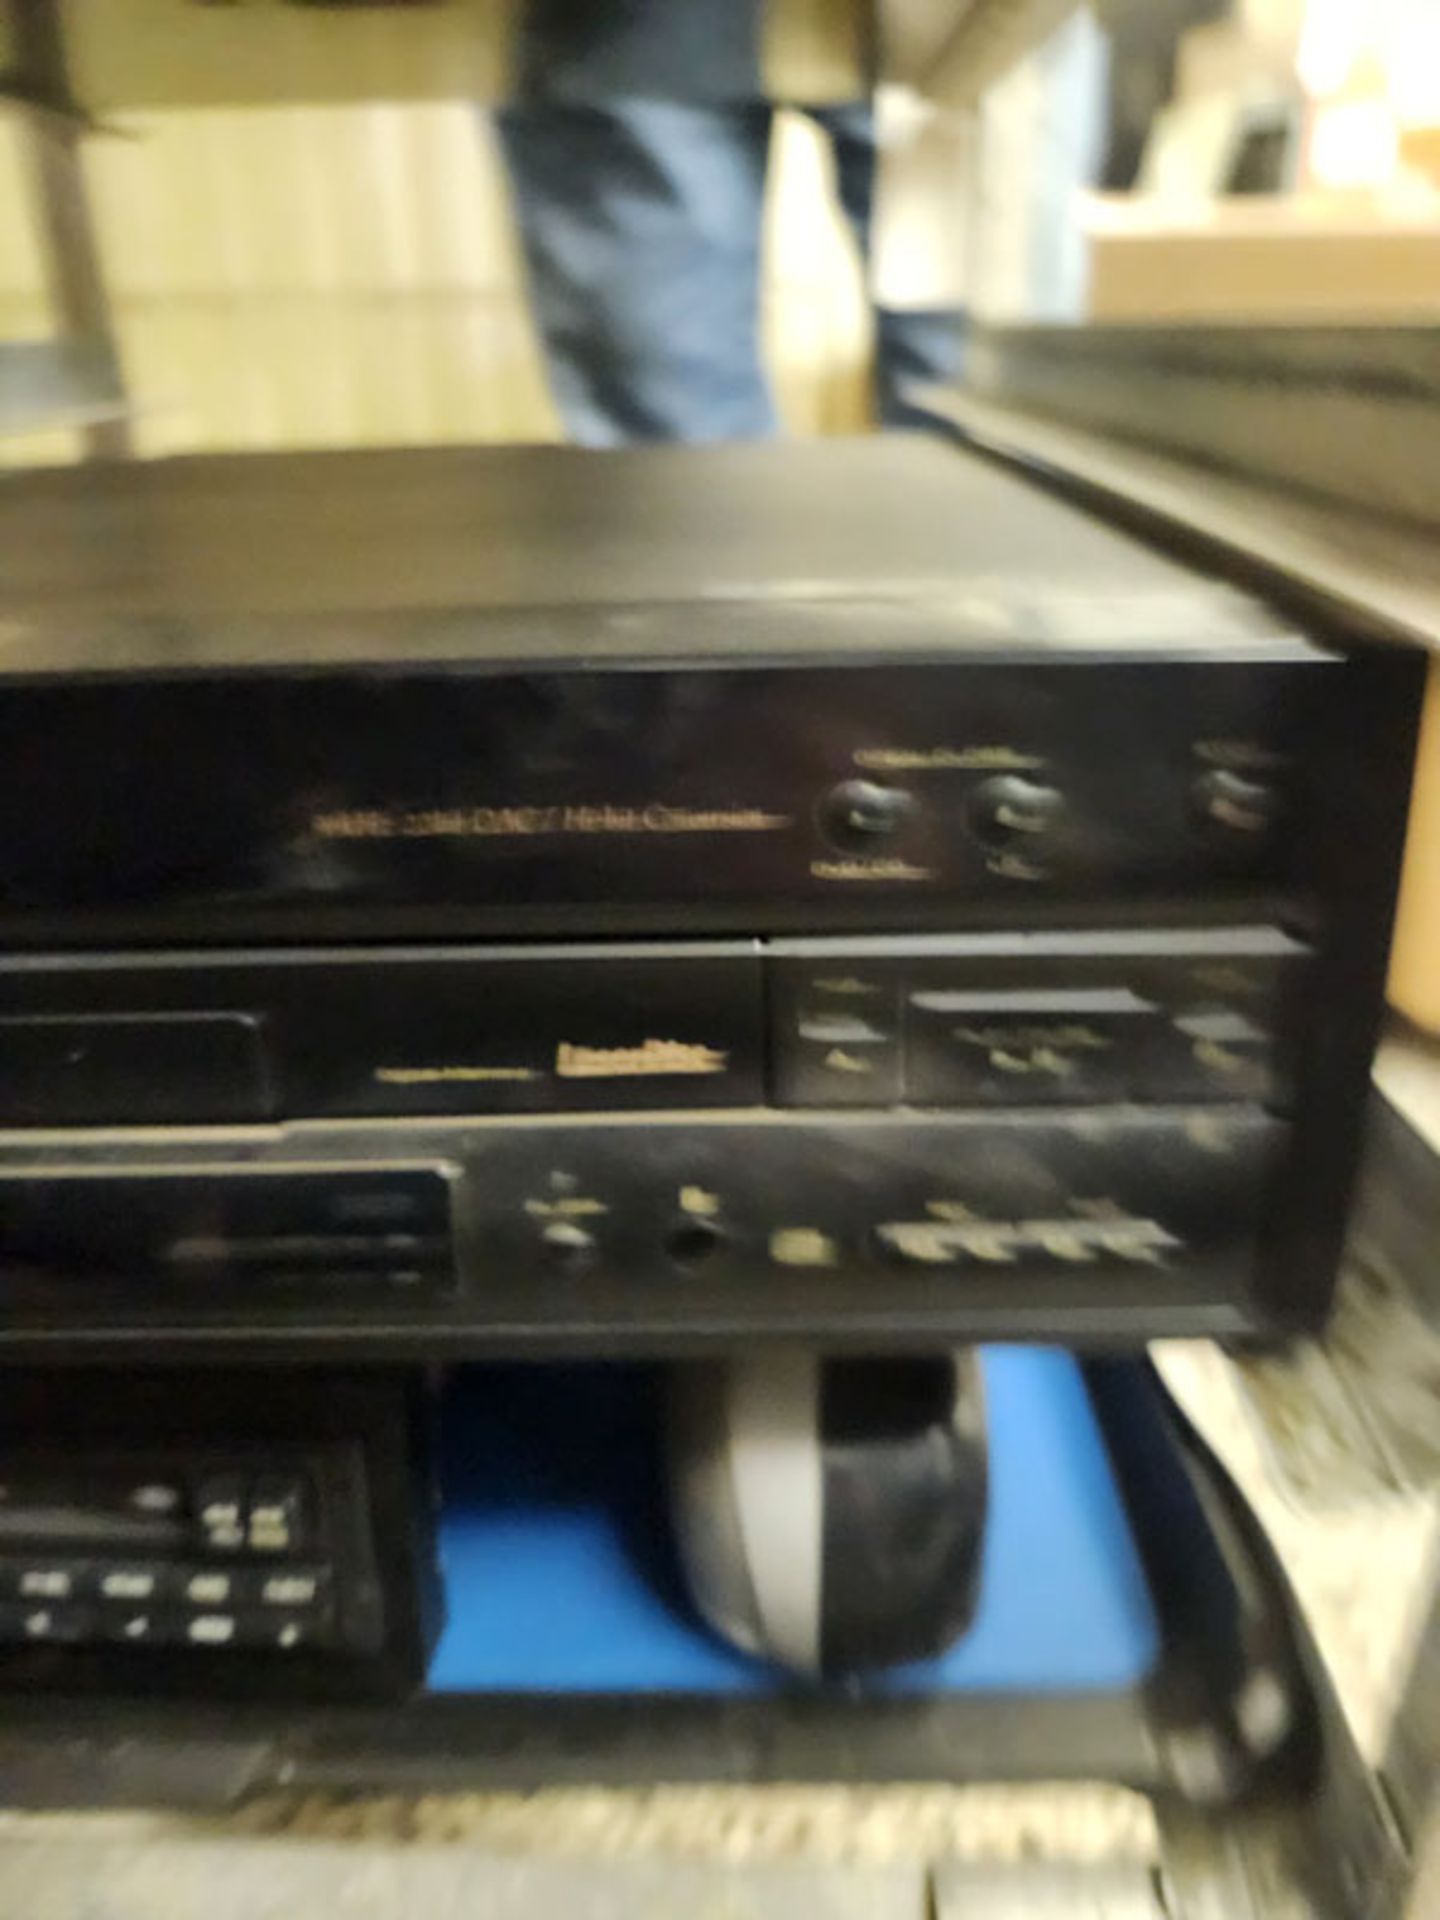 LOT OF 3 ASSORTED ELECTRONICS - DVD PLAYER(HAS A STICKER THAT SAYS DOES NOT PLAY), CAR STEREO CASSET - Image 3 of 5